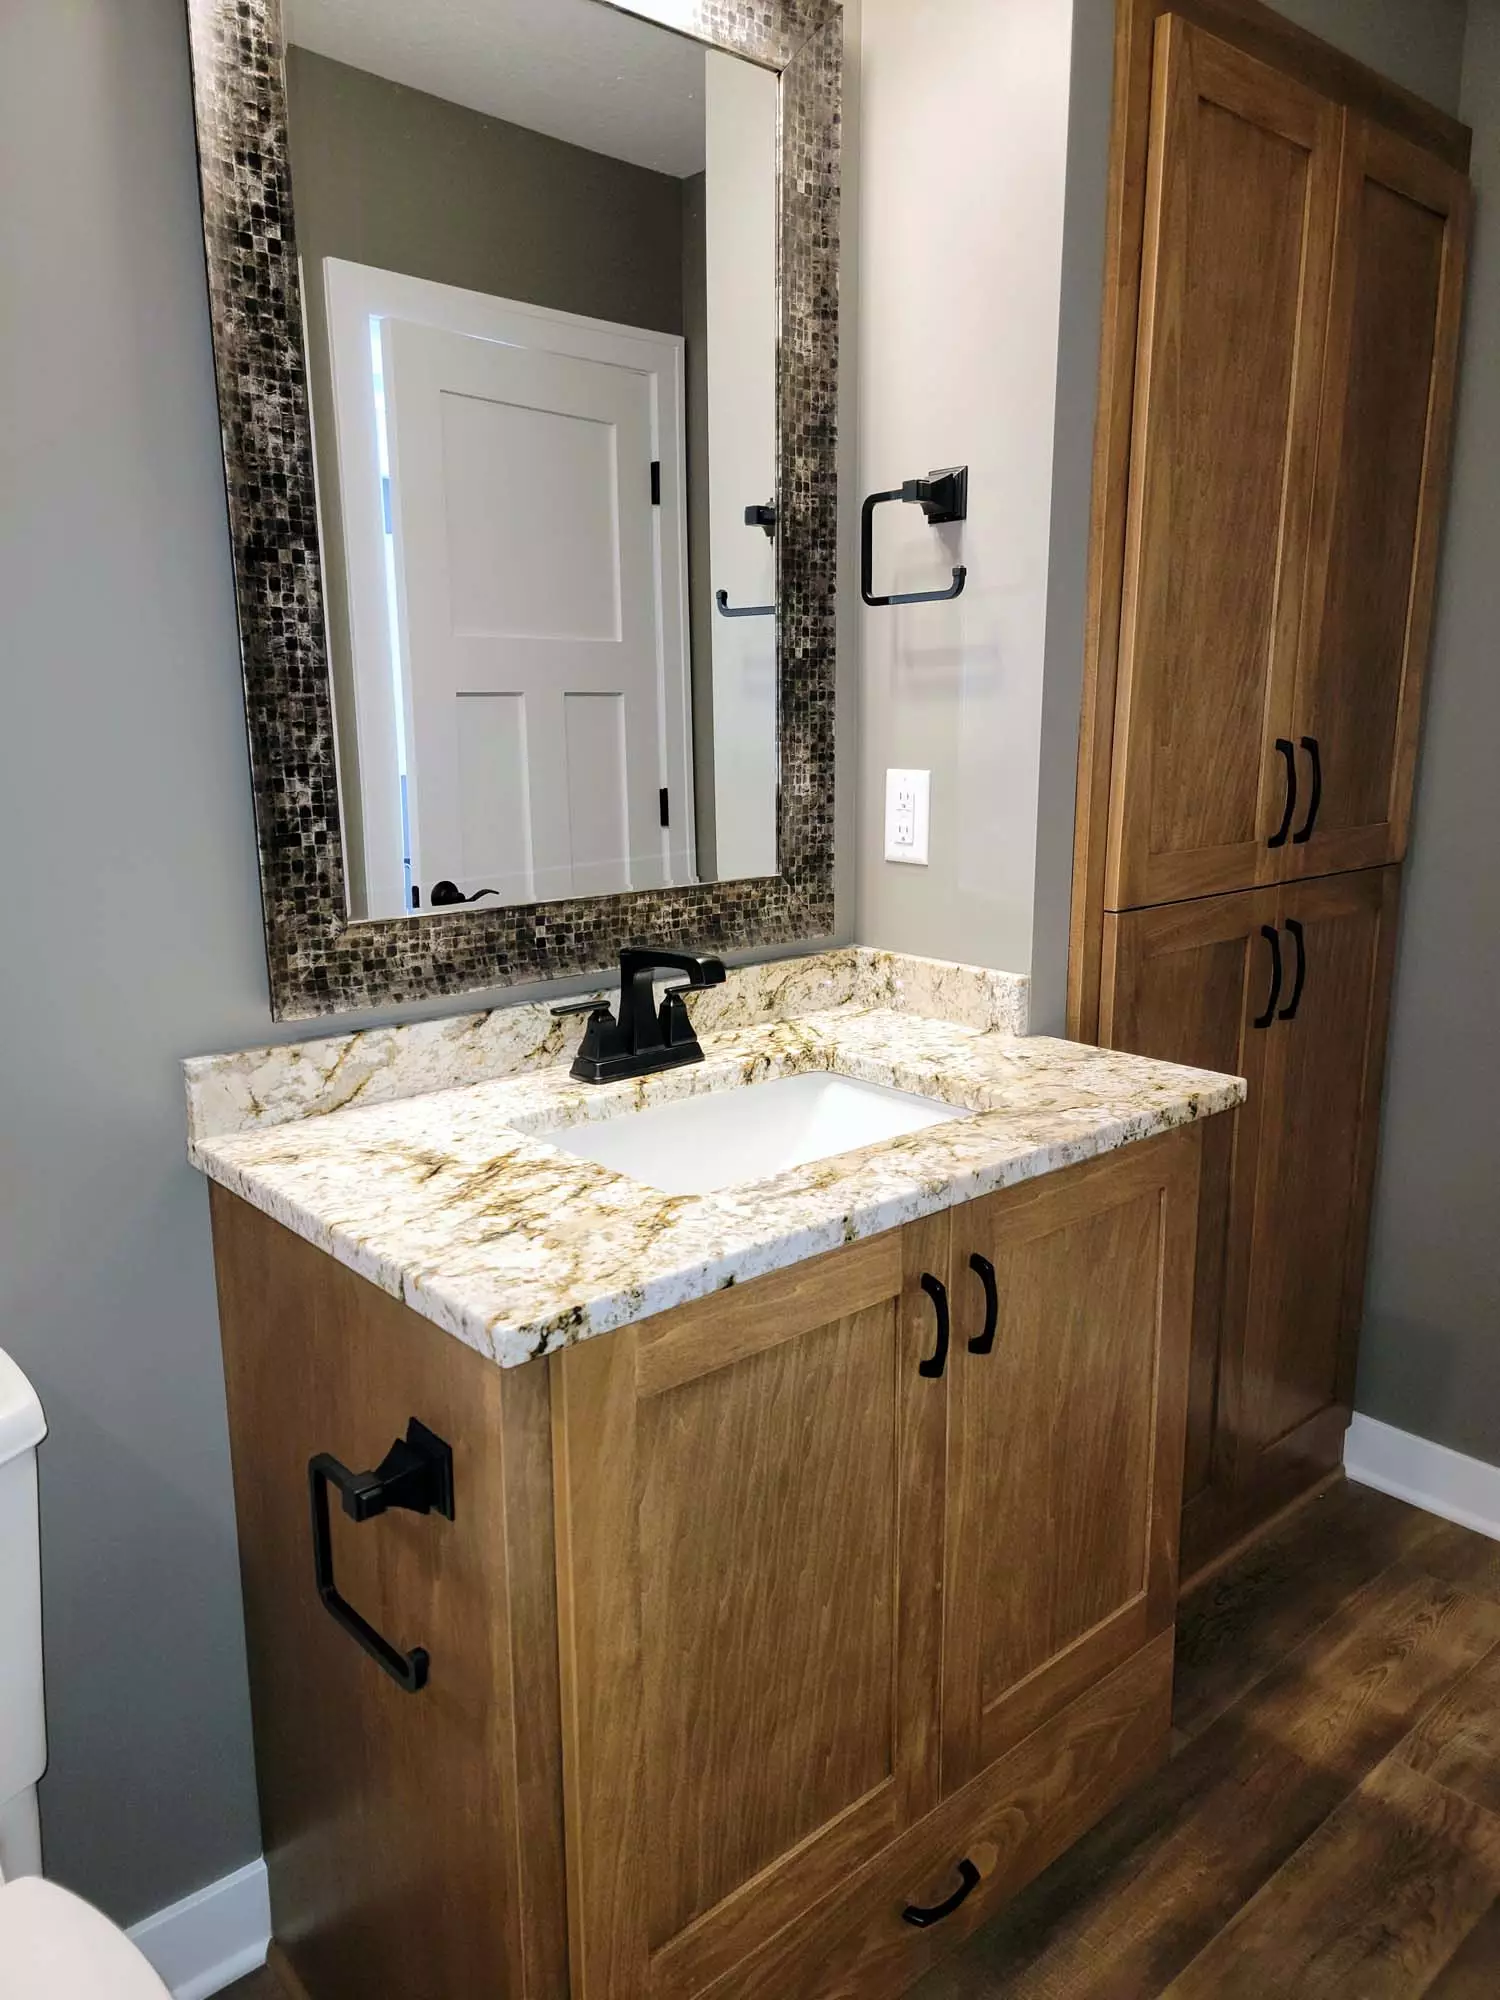 Rustic finish vanity and linen cabinetry